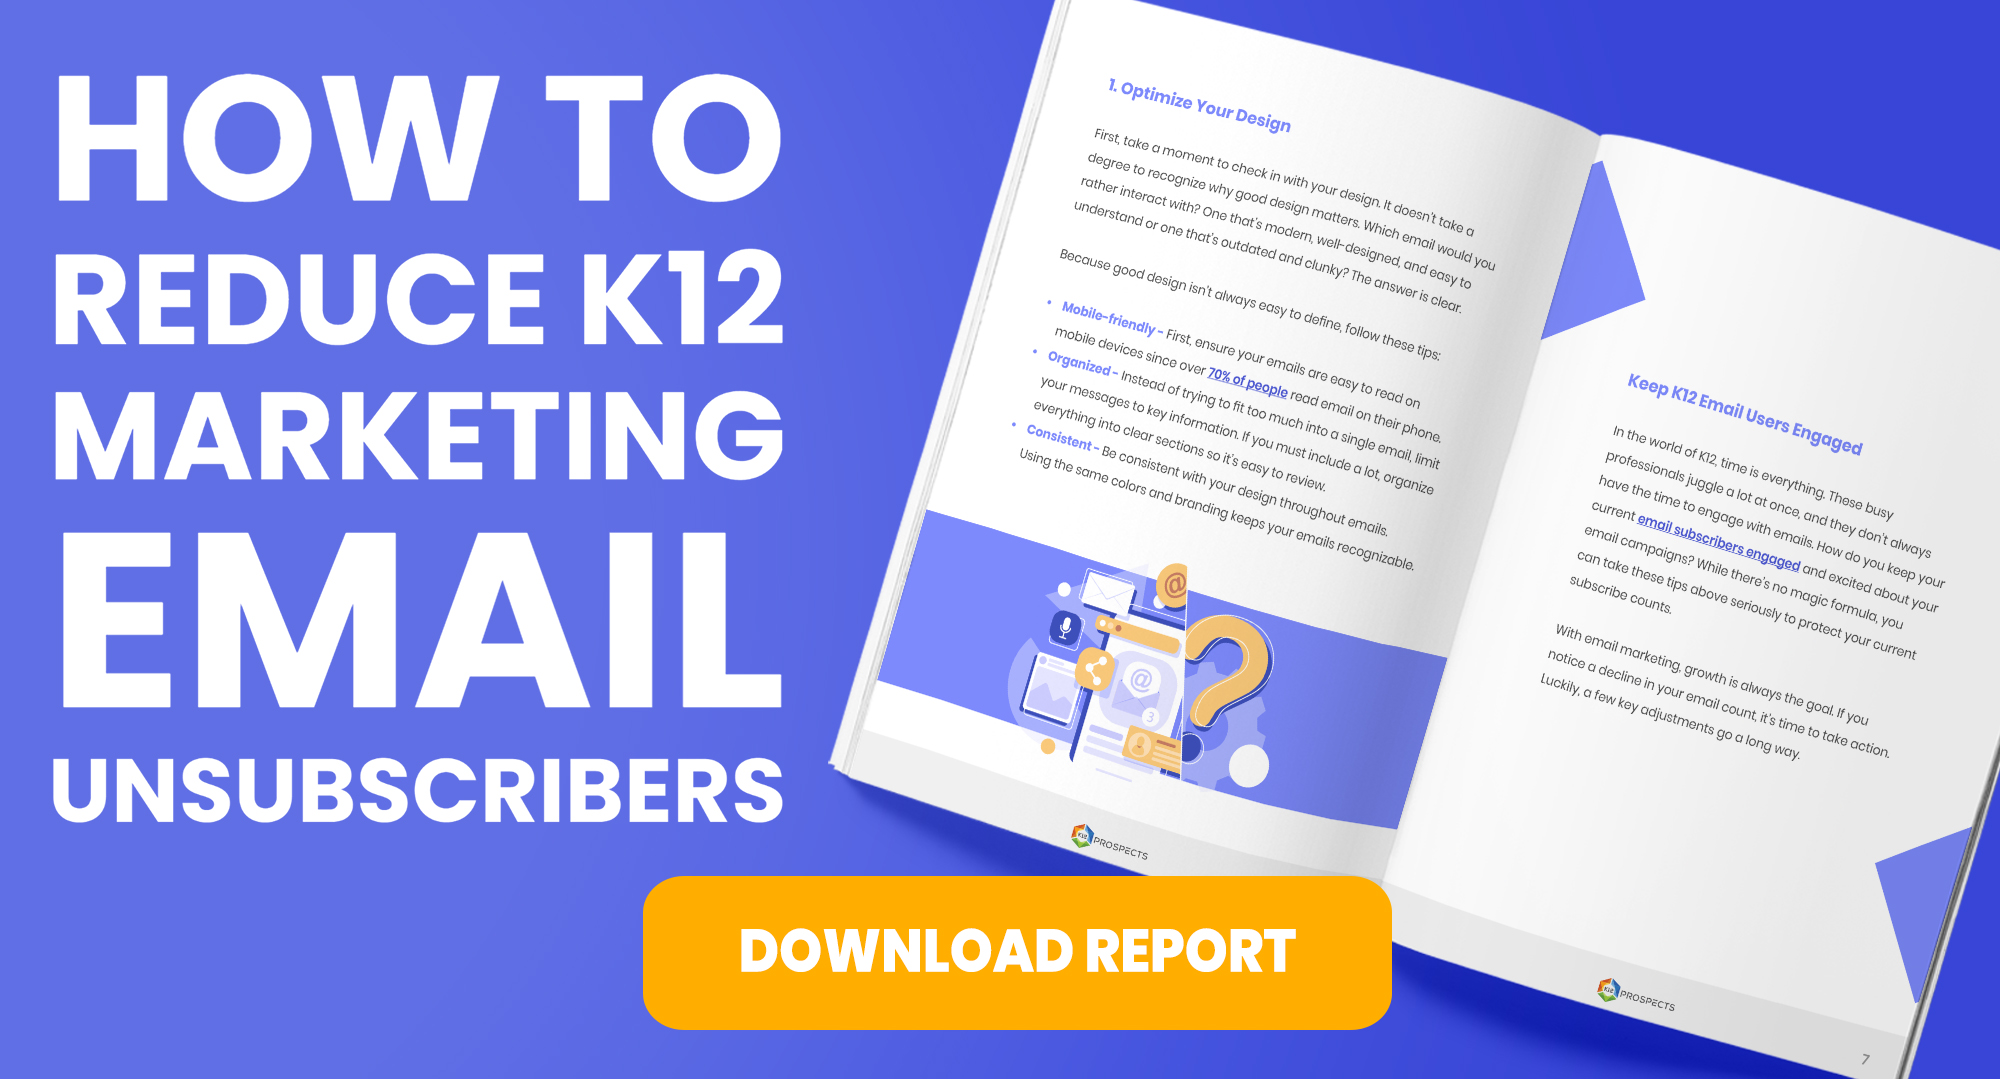 CTA How to Reduce K12 Marketing Email Unsubscribers